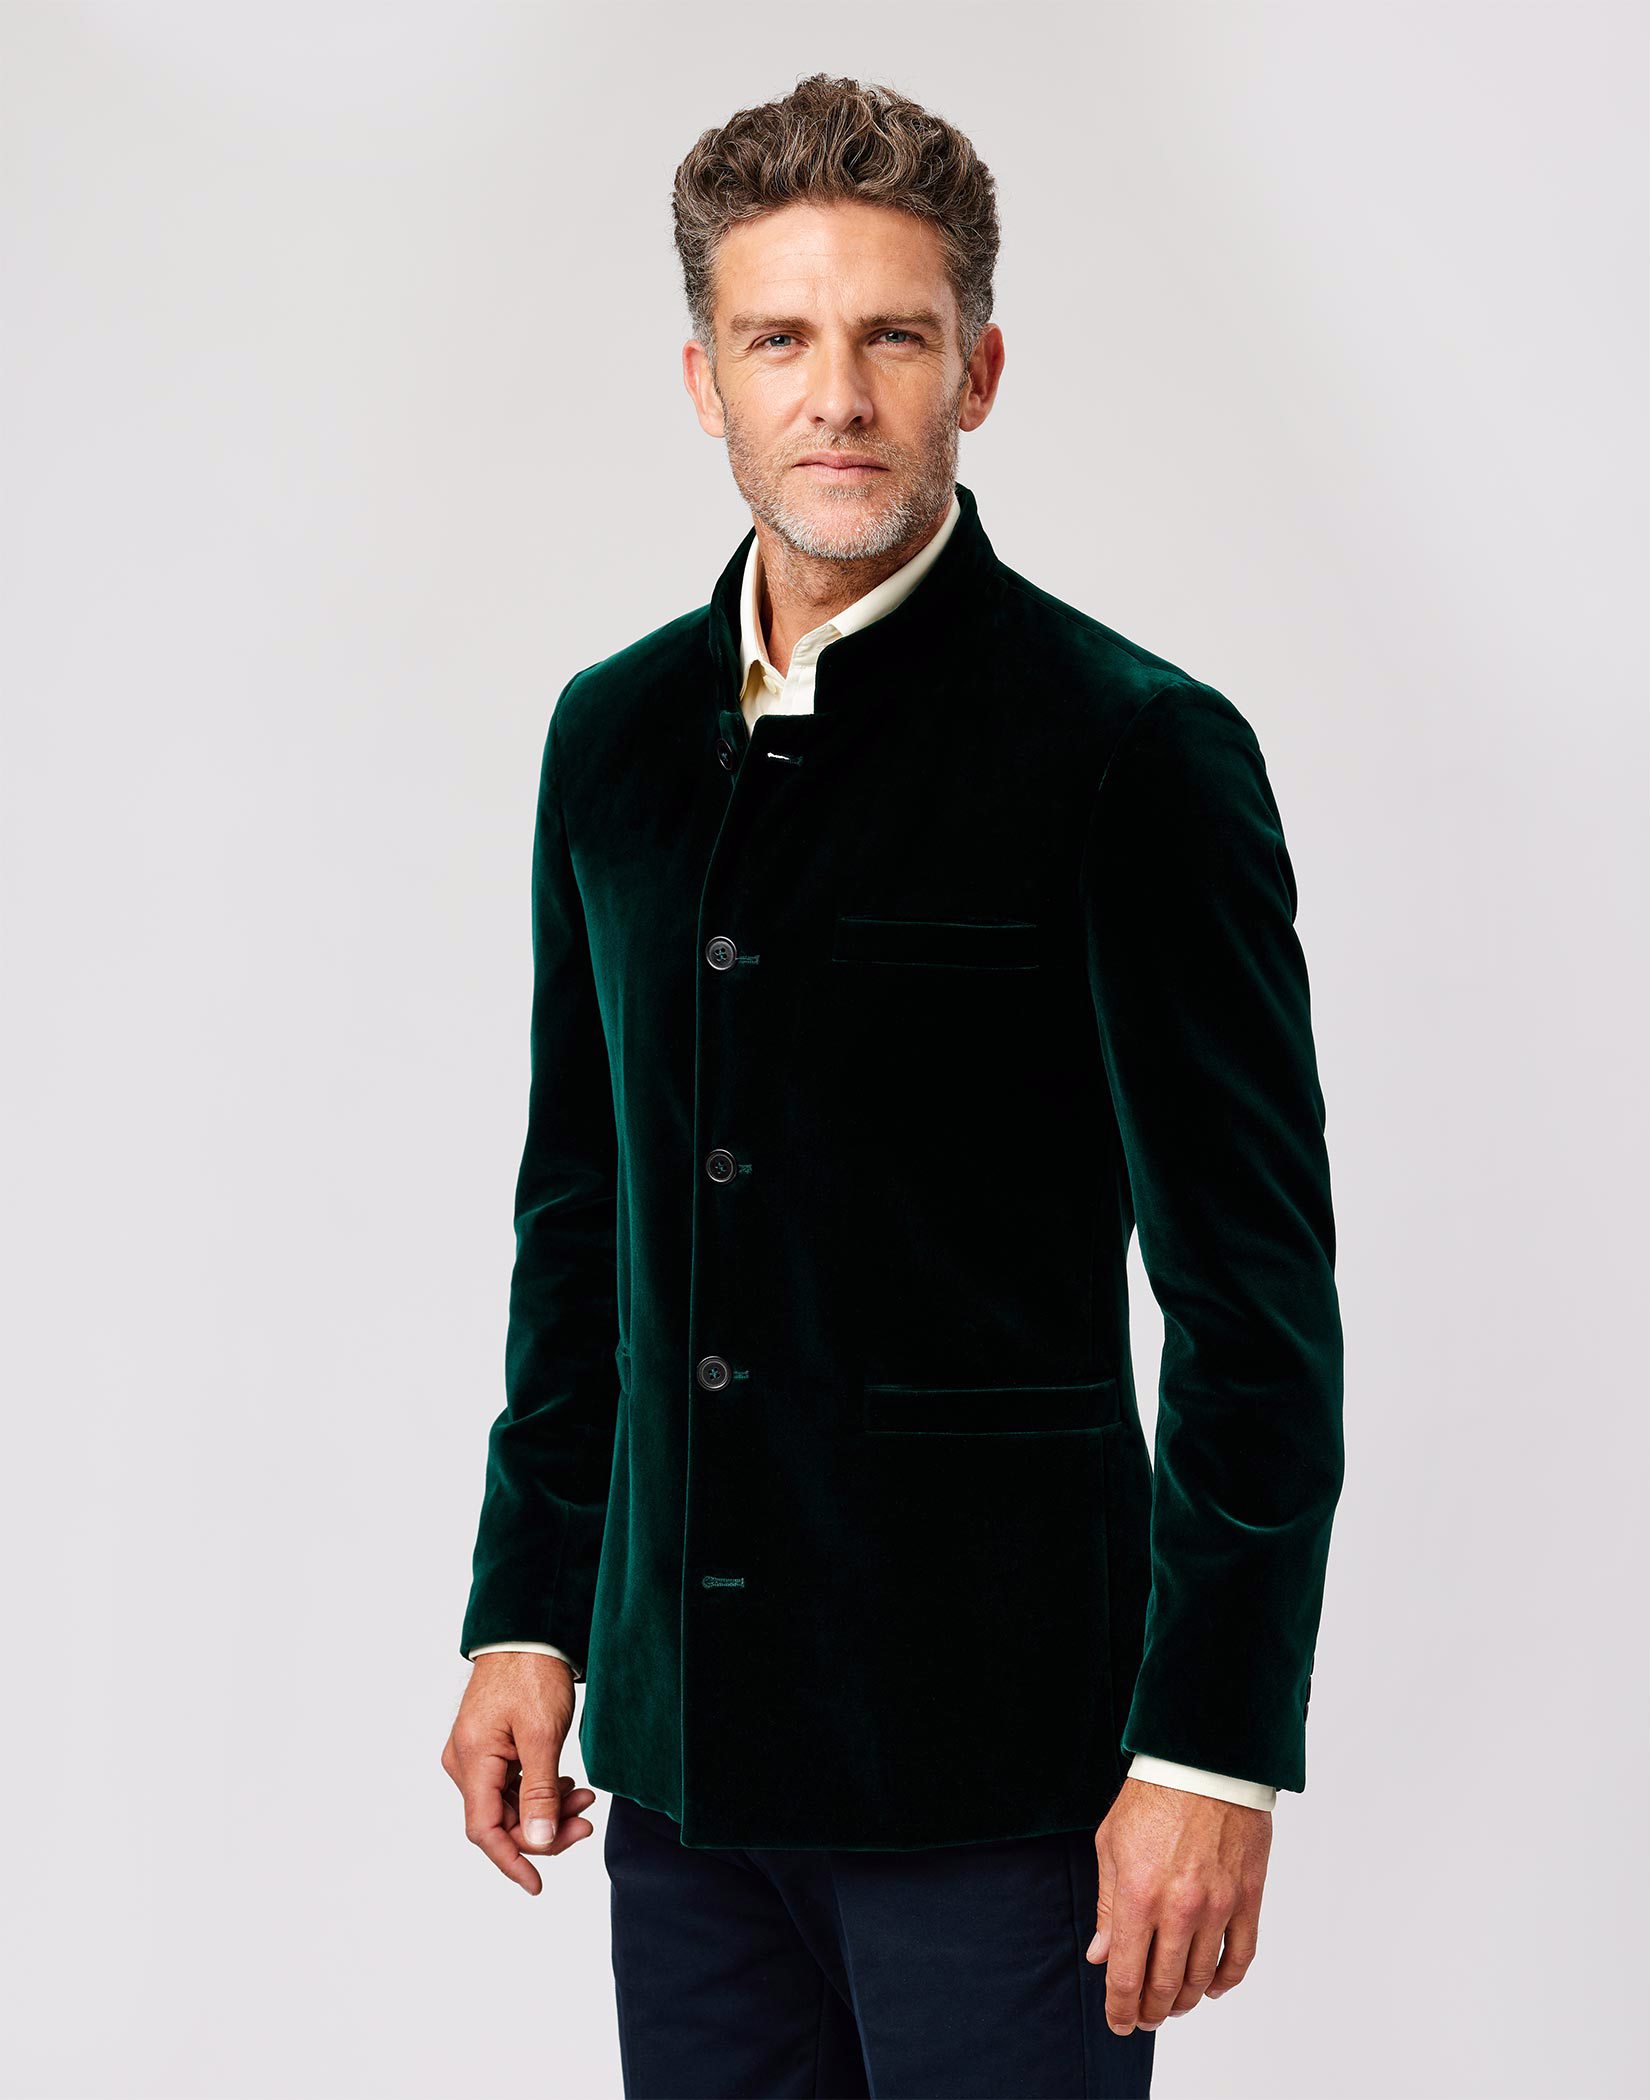 Green for Men Lubiam Cotton Suit Jacket in Dark Green Mens Clothing Jackets Blazers 